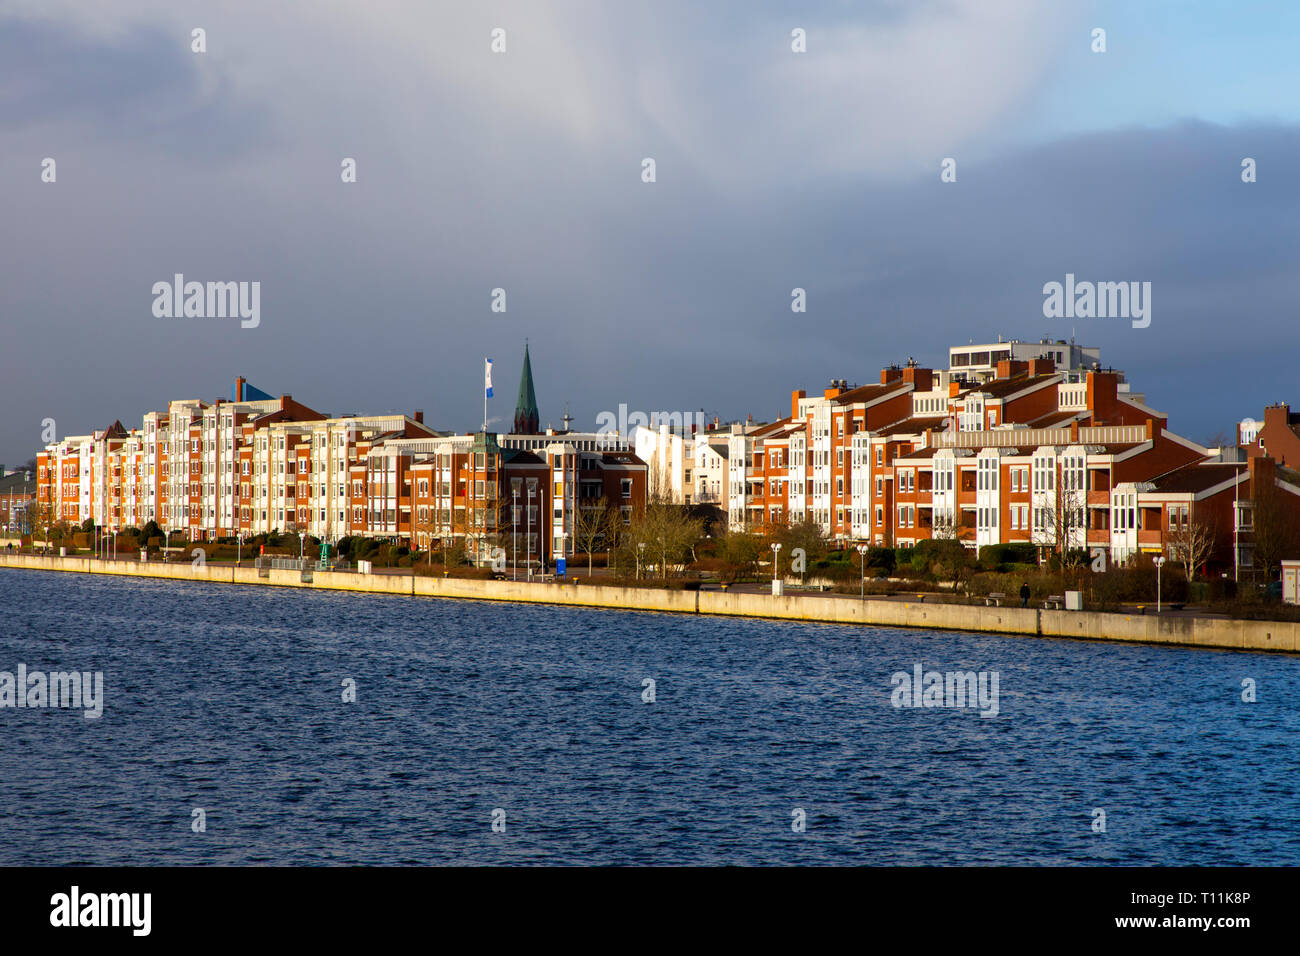 Wilhelmshaven, harbor, on the south beach, residential buildings, Stock Photo